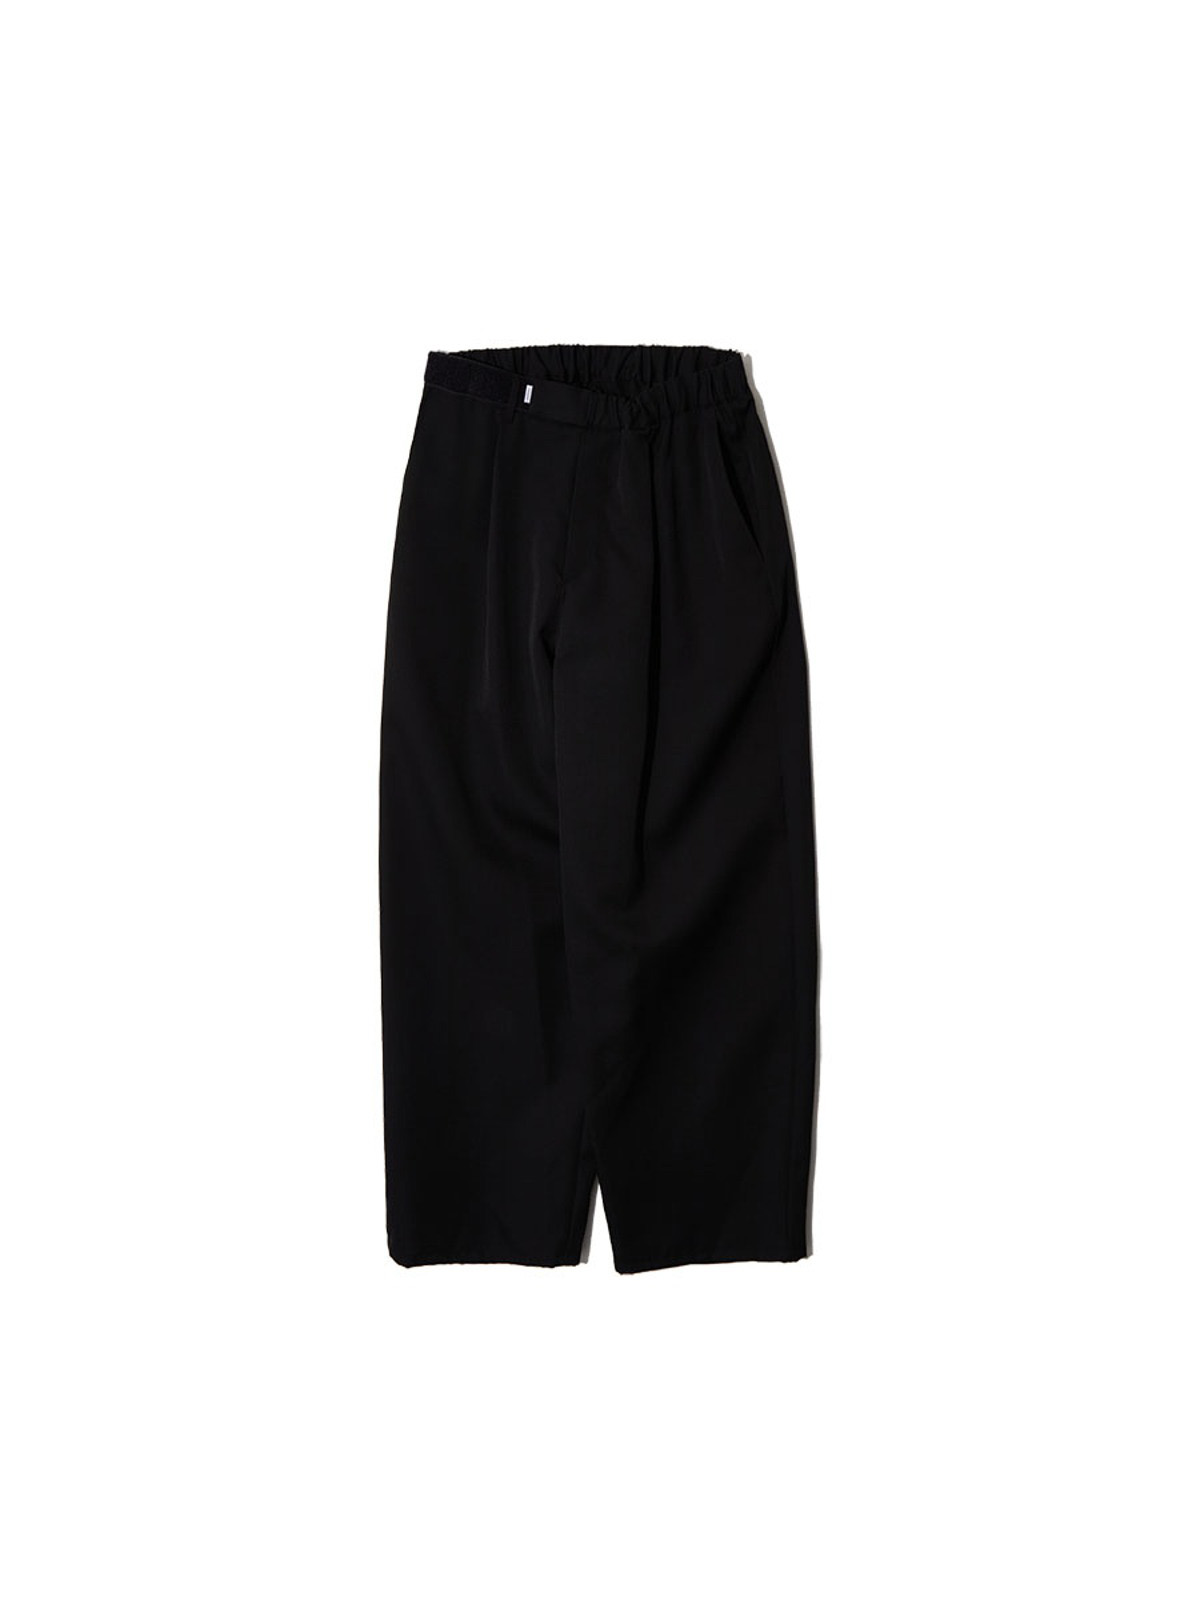 SCALE OFF WOOL WIDE CHEF PANTS (BLACK)